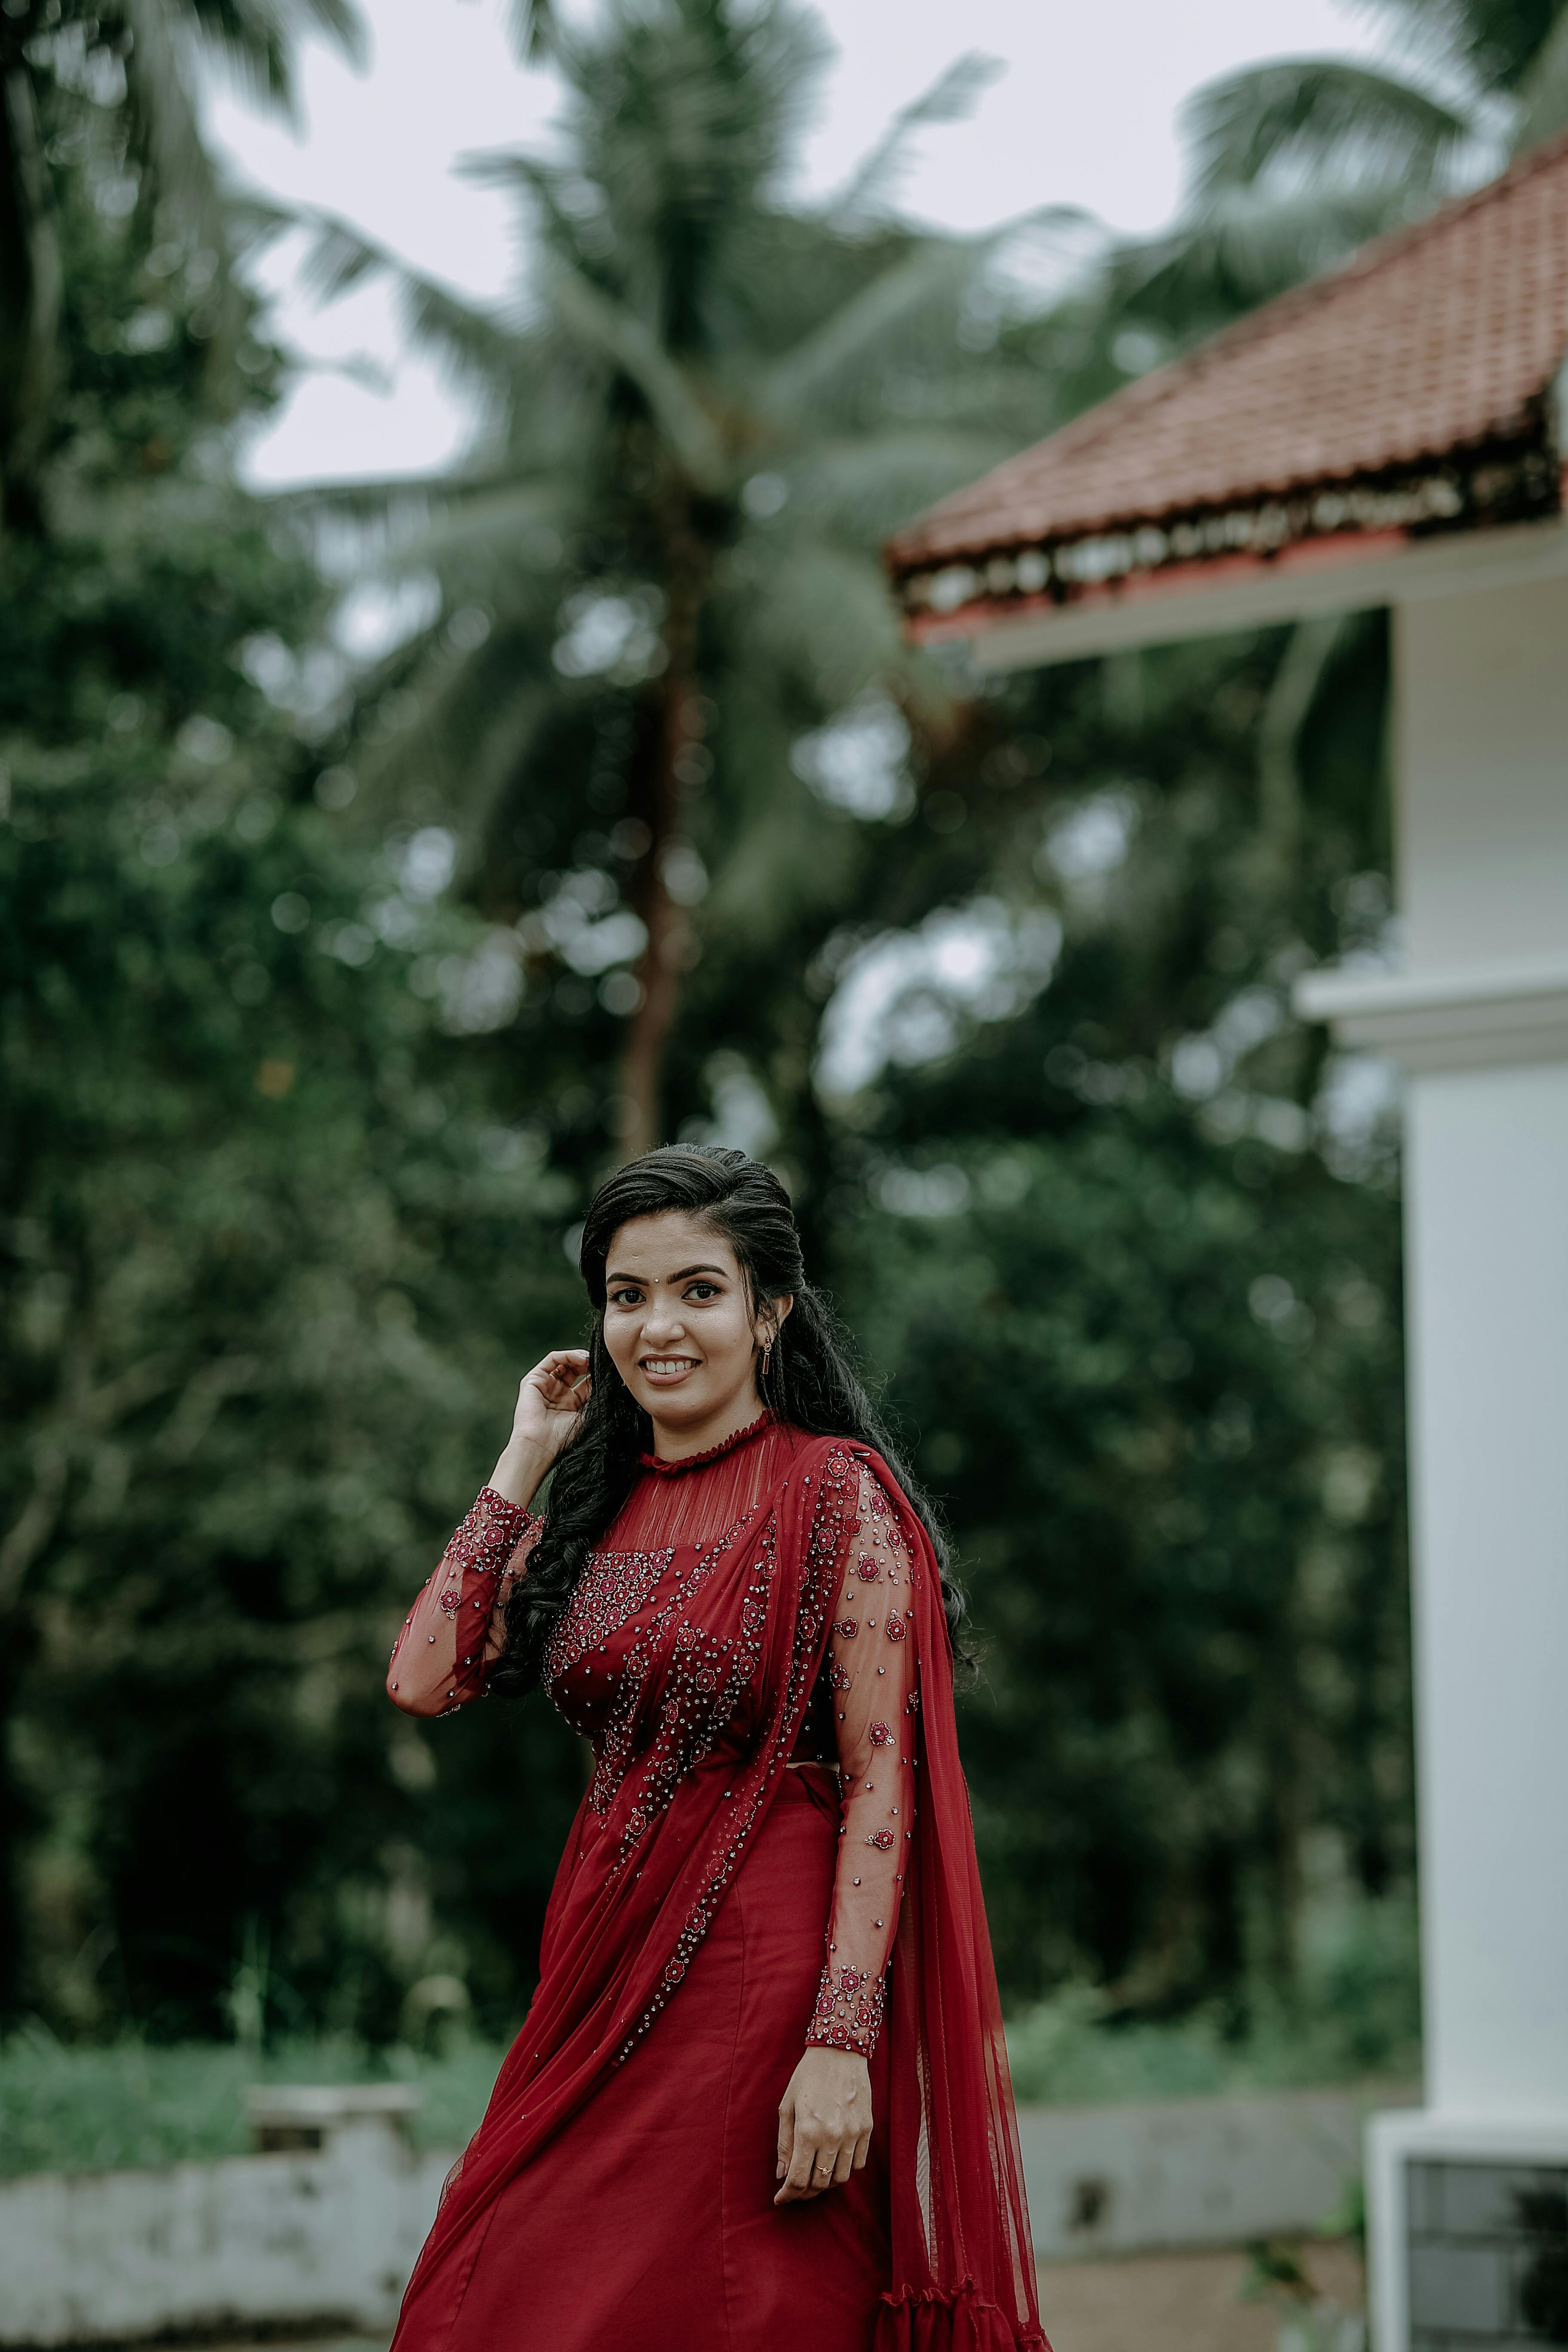 Image may contain: one or more people, beard and outdoor | Malayalam  actress, Model poses photography, Girl photo poses